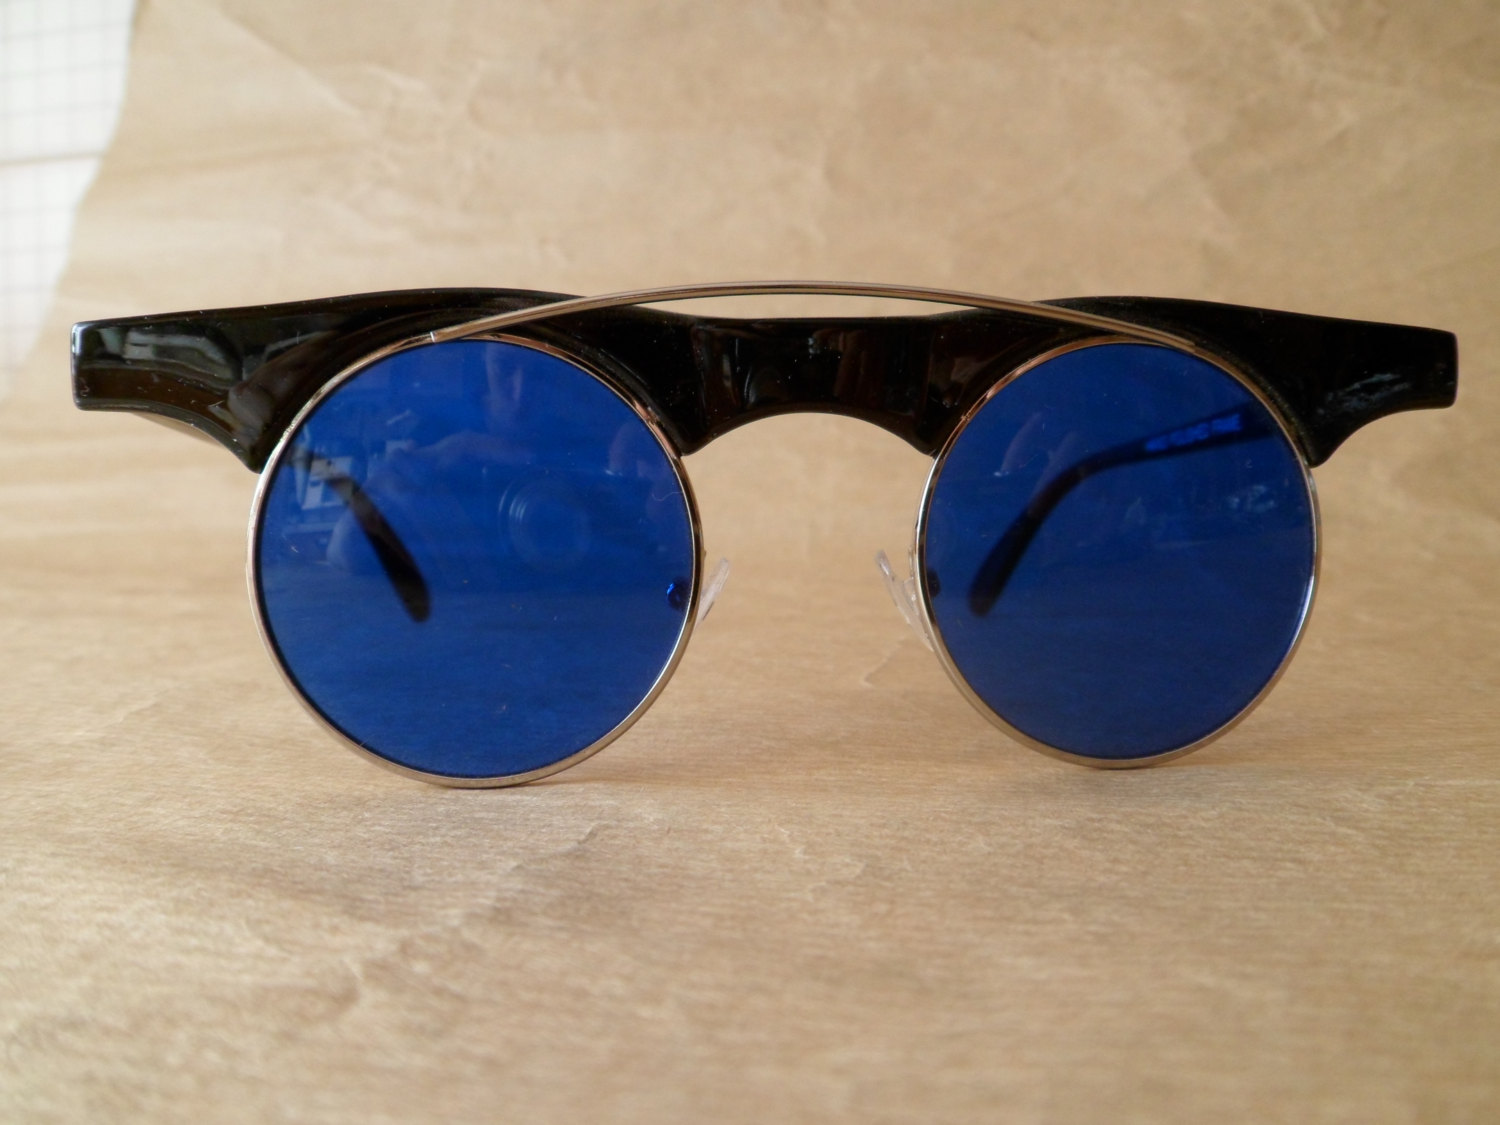 Vintage from deadstock round plastic sunglasses with metal bridge - only BLUE steampunk buy now online